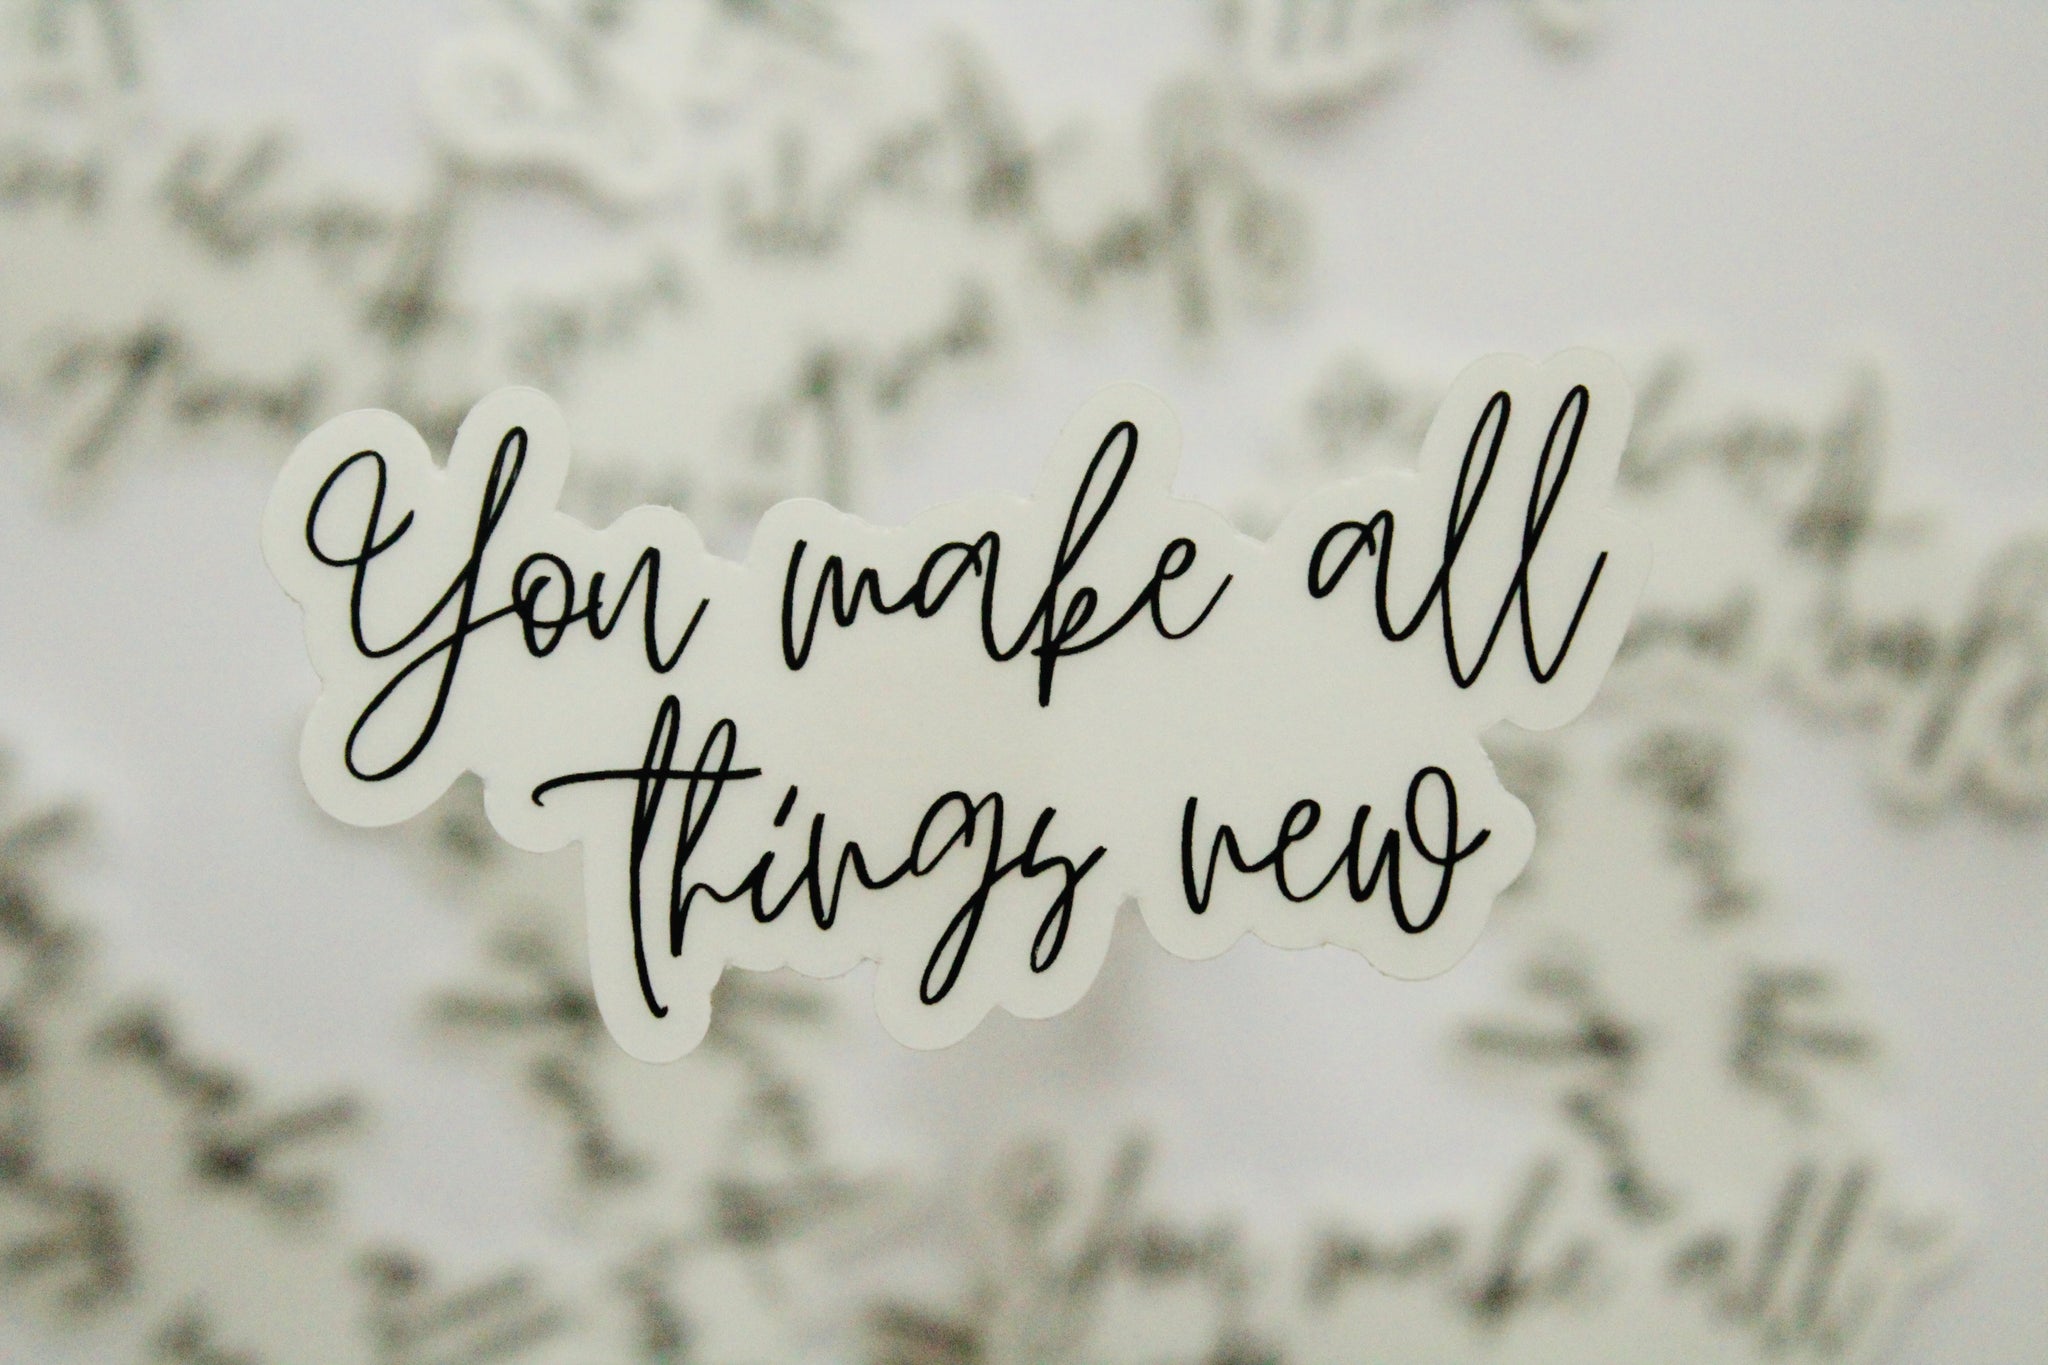 You Make All Things New